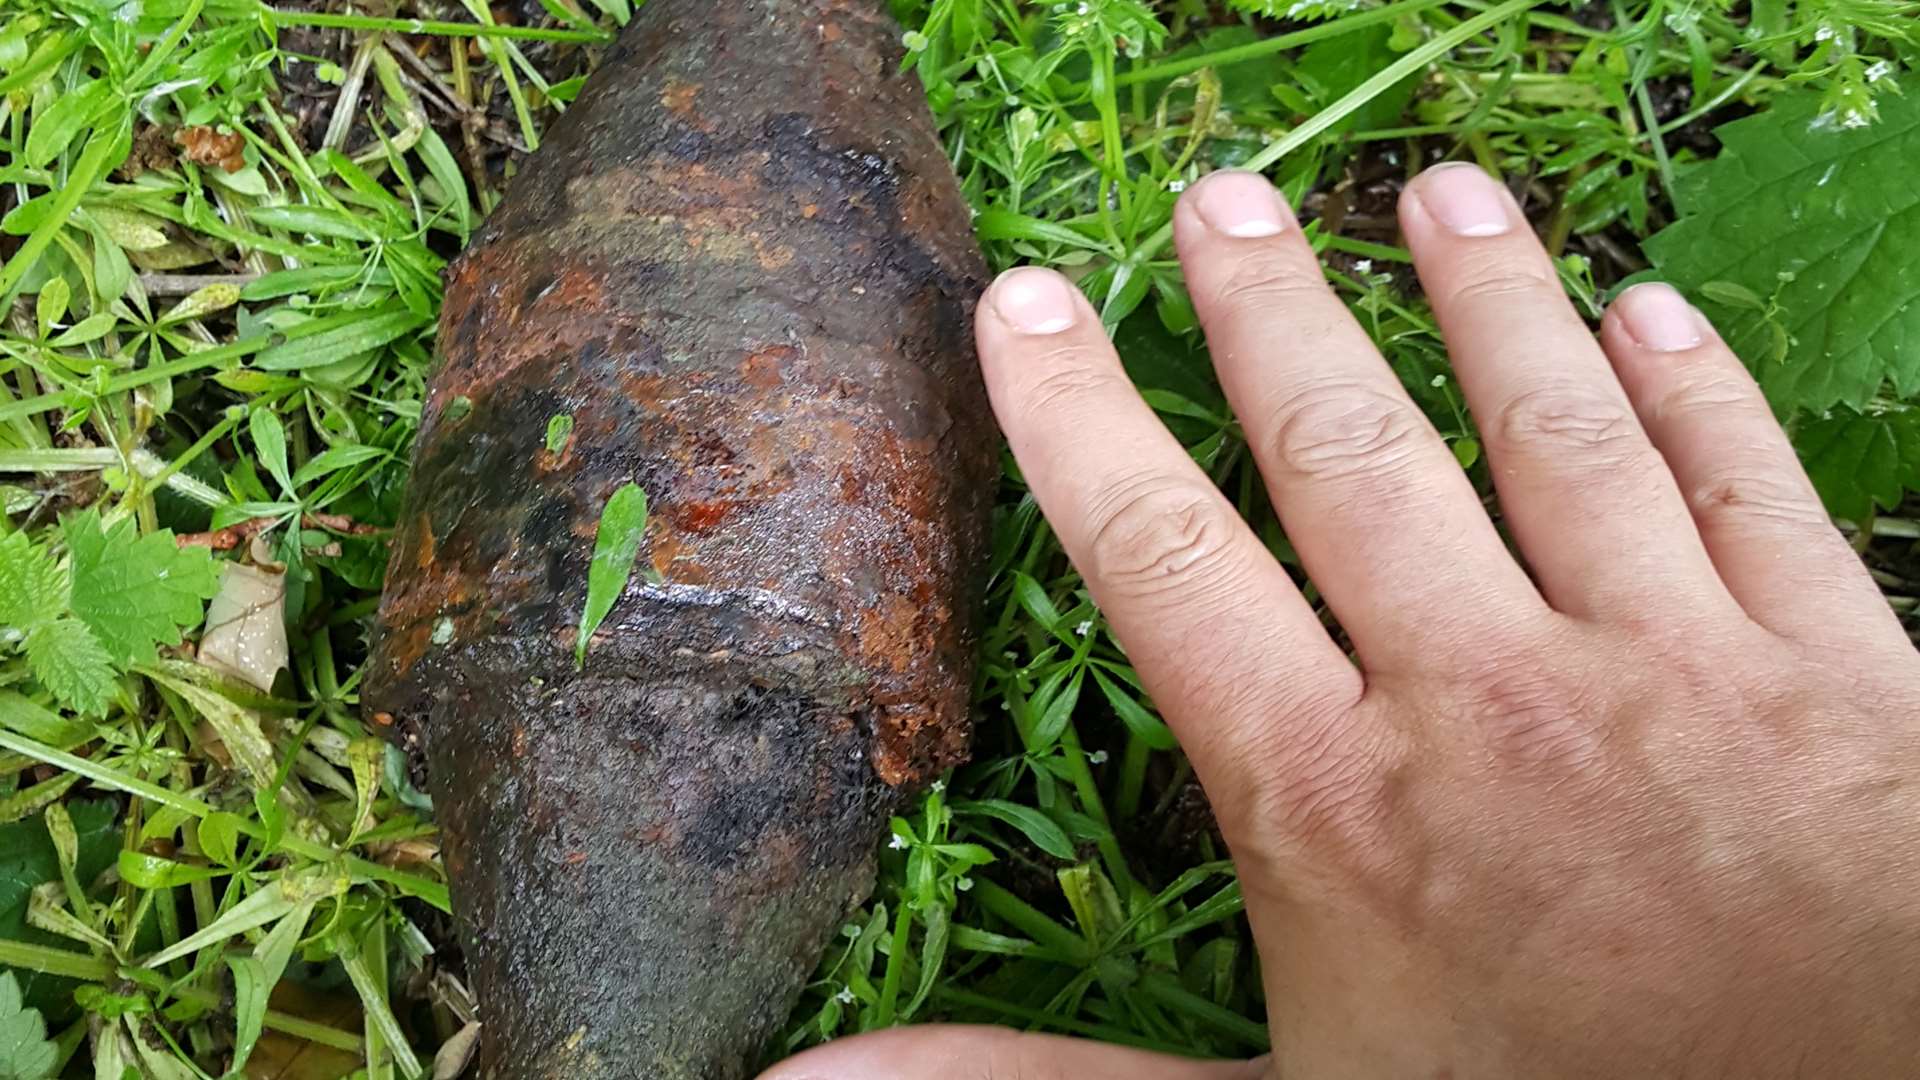 The unexploded Second World War bomb